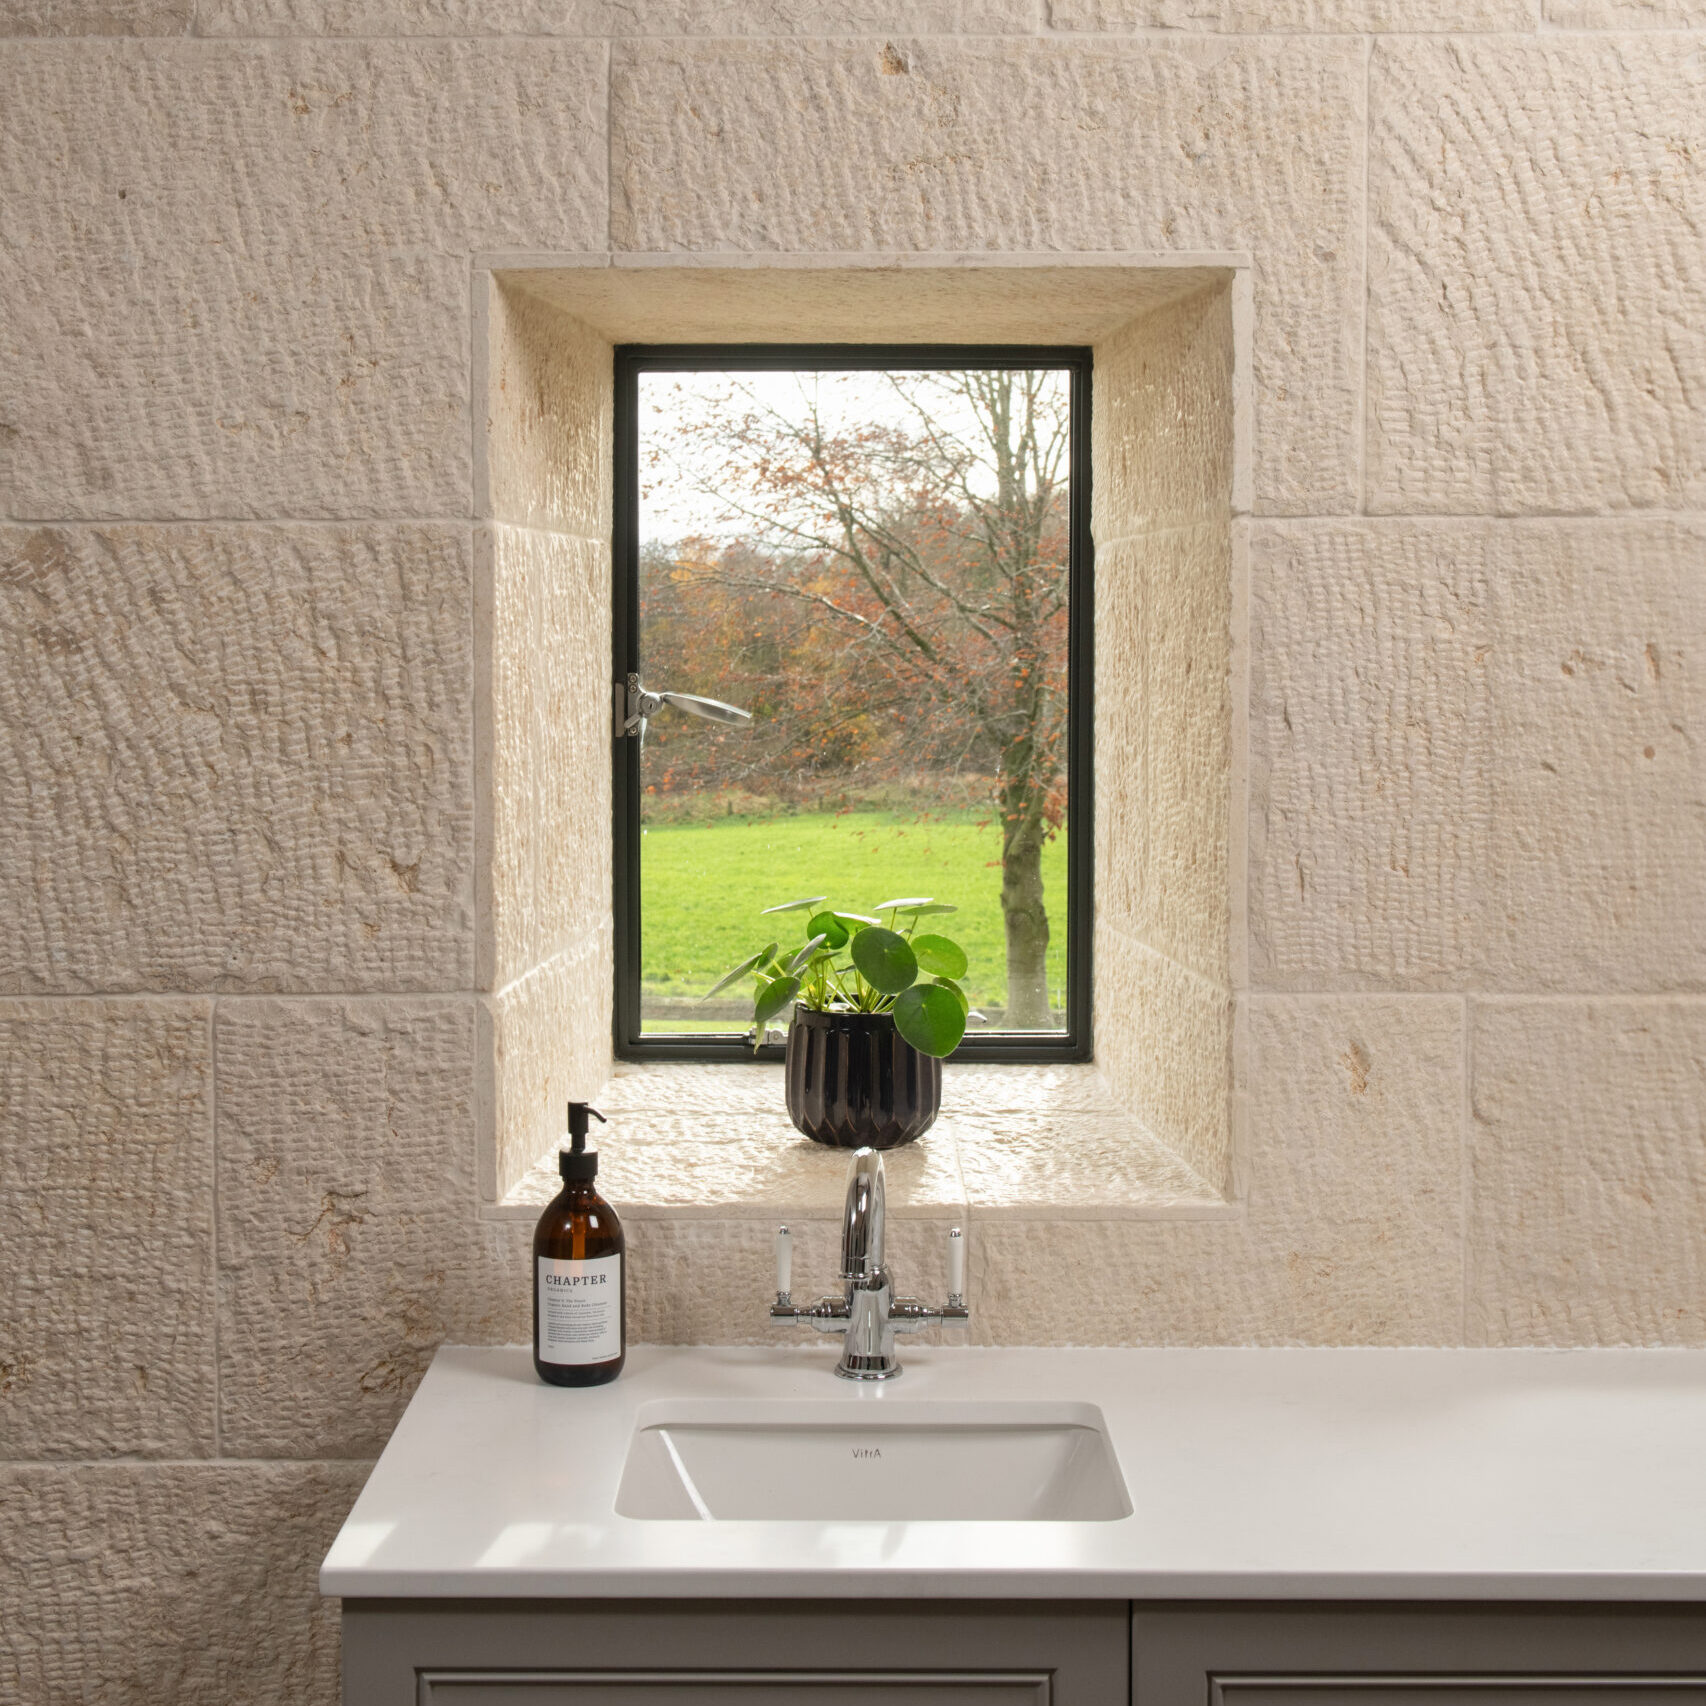 Lapicida Biblical Ivory wall surface brings an antique look, texture and tone to the bathroom at Danby Grange